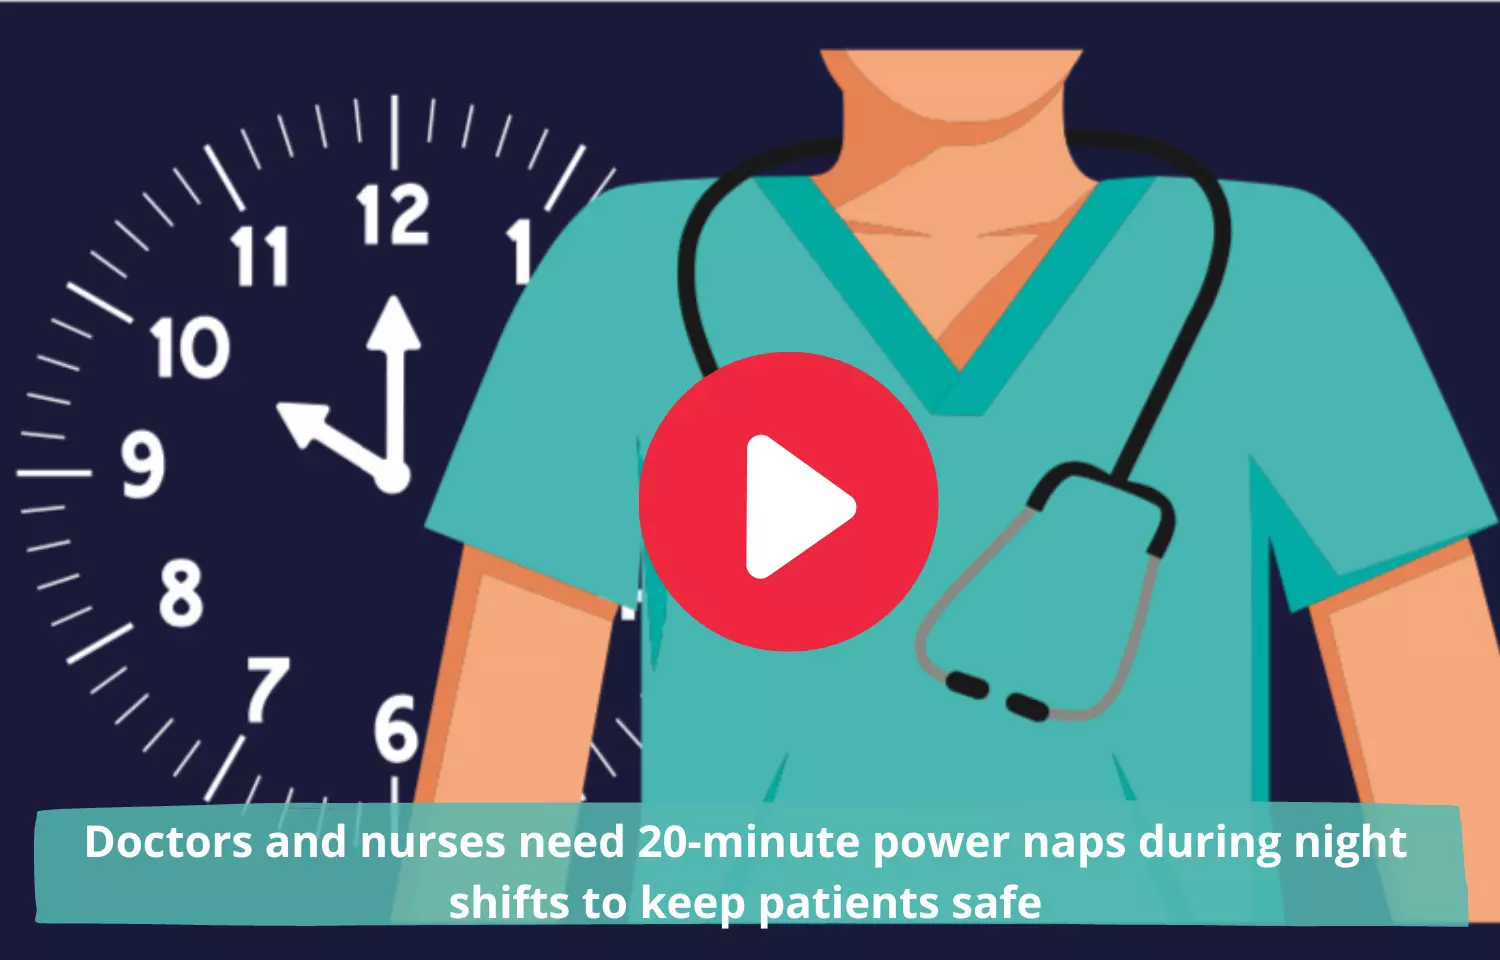 Doctors and nurses need 20-minute power naps during night shifts to keep patients safe